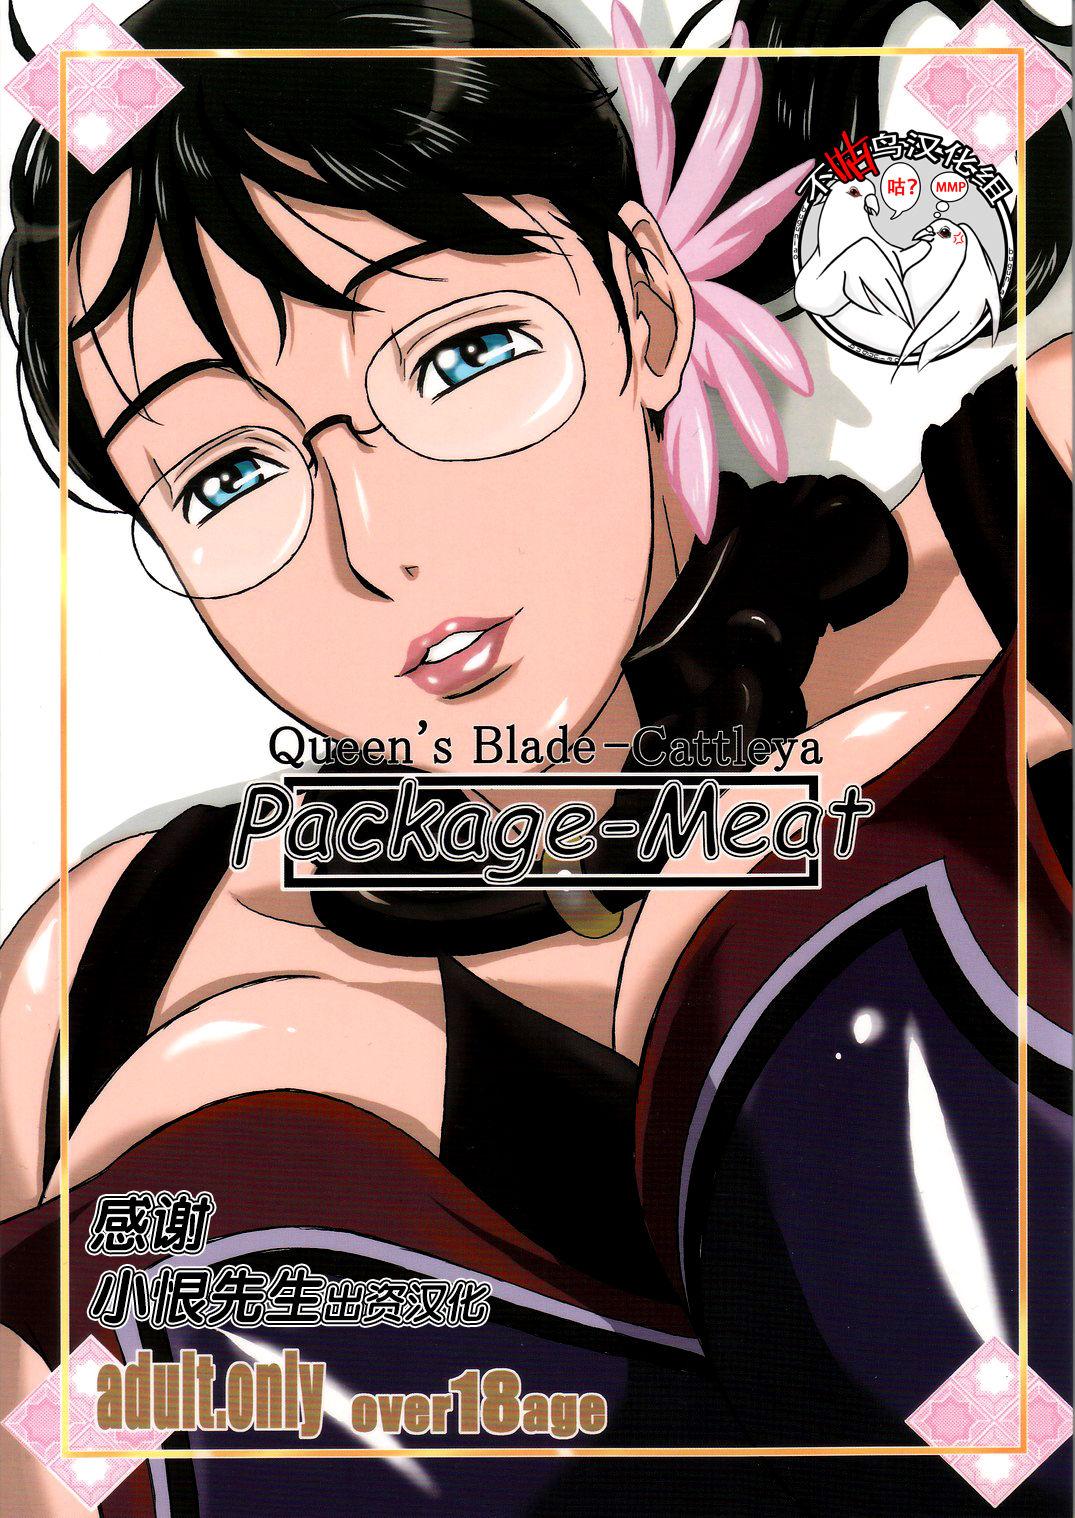 Cums (C72) [Shiawase Pullin Dou (Ninroku)] Package Meat (Queen's Blade) [Chinese] amateur coloring version - Queens blade Ballbusting - Page 1